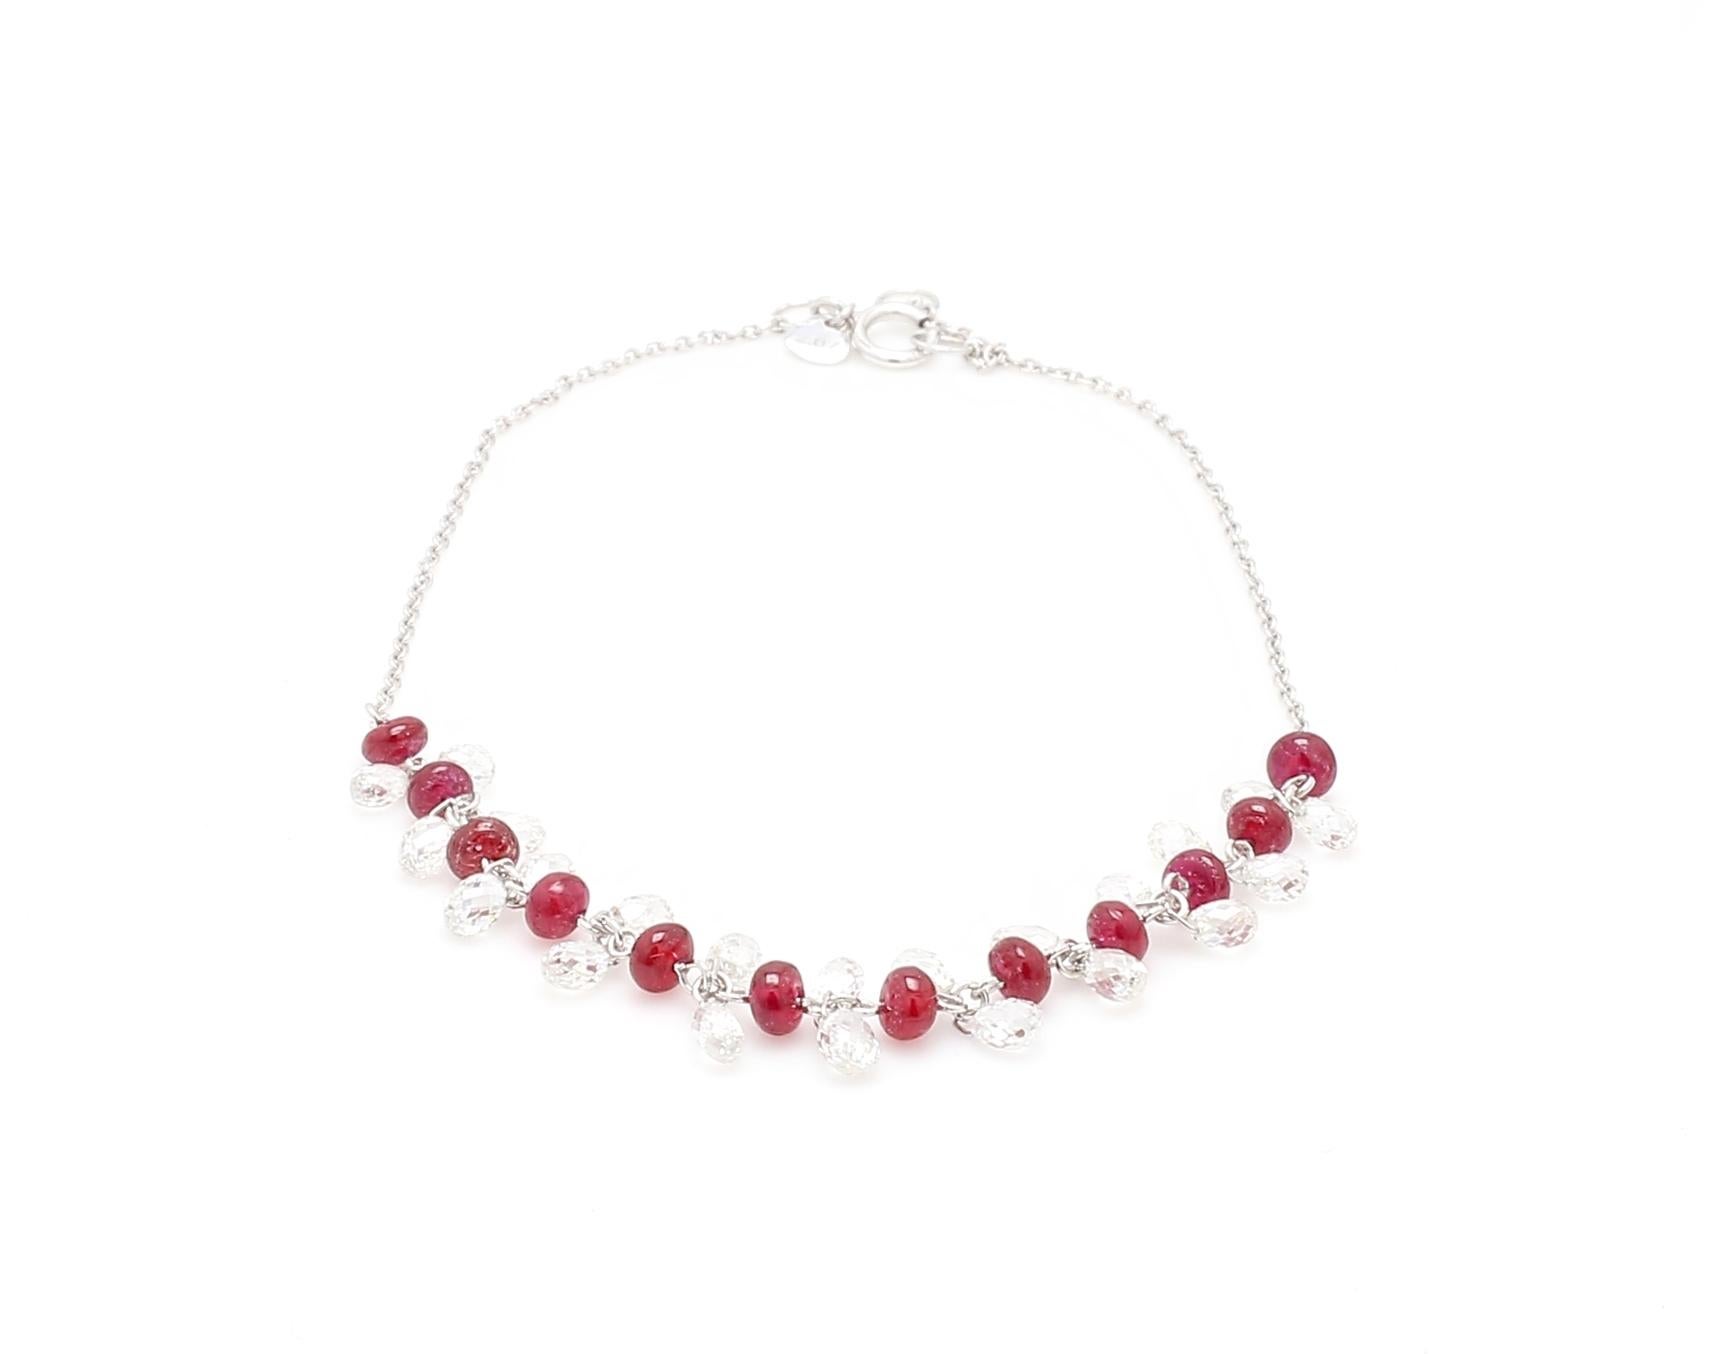 PANIM Diamond Briolette And Ruby 18K White Gold Dangling Bracelet

Our dangling briolette-cut diamond bracelet is extremely wearable. Its versatility and classic design make it a great accompaniment to various occasions. Beautifully made with